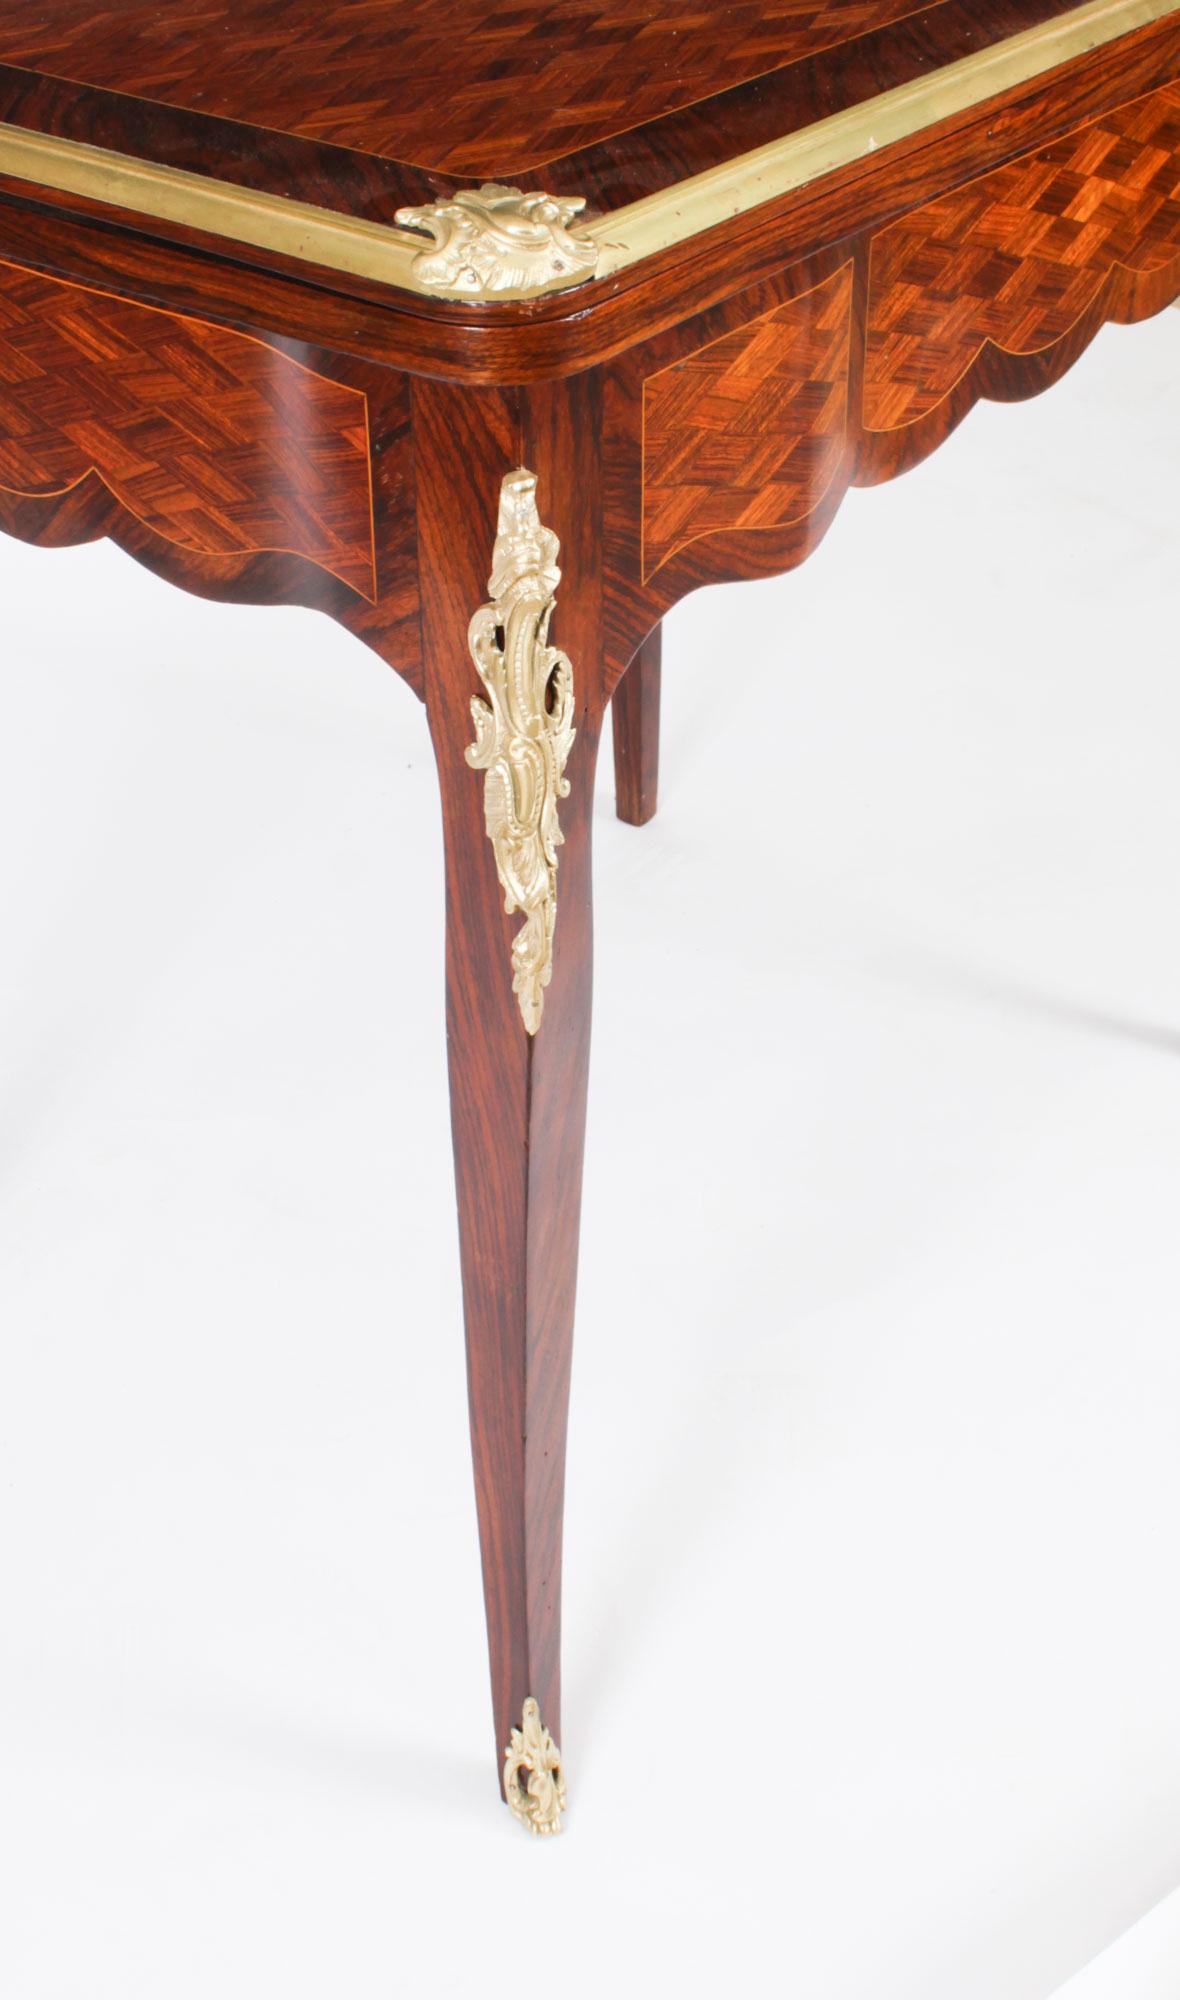 Antique French Burr Walnut Parquetry Card Backgammon Table 19th Century For Sale 4